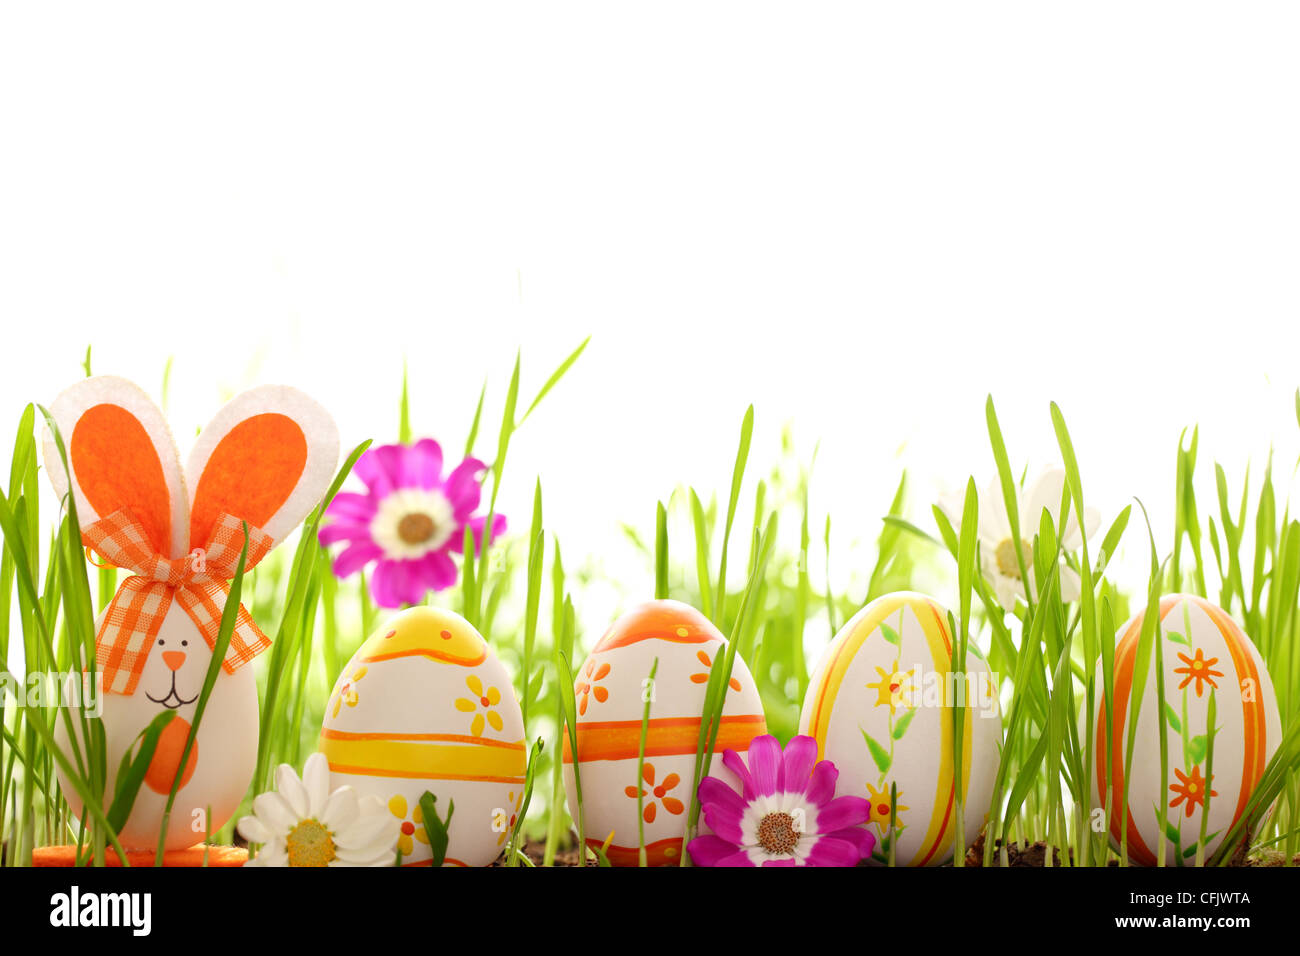 Easter Eggs with Daisy Flower on Fresh Green Grass Stock Photo